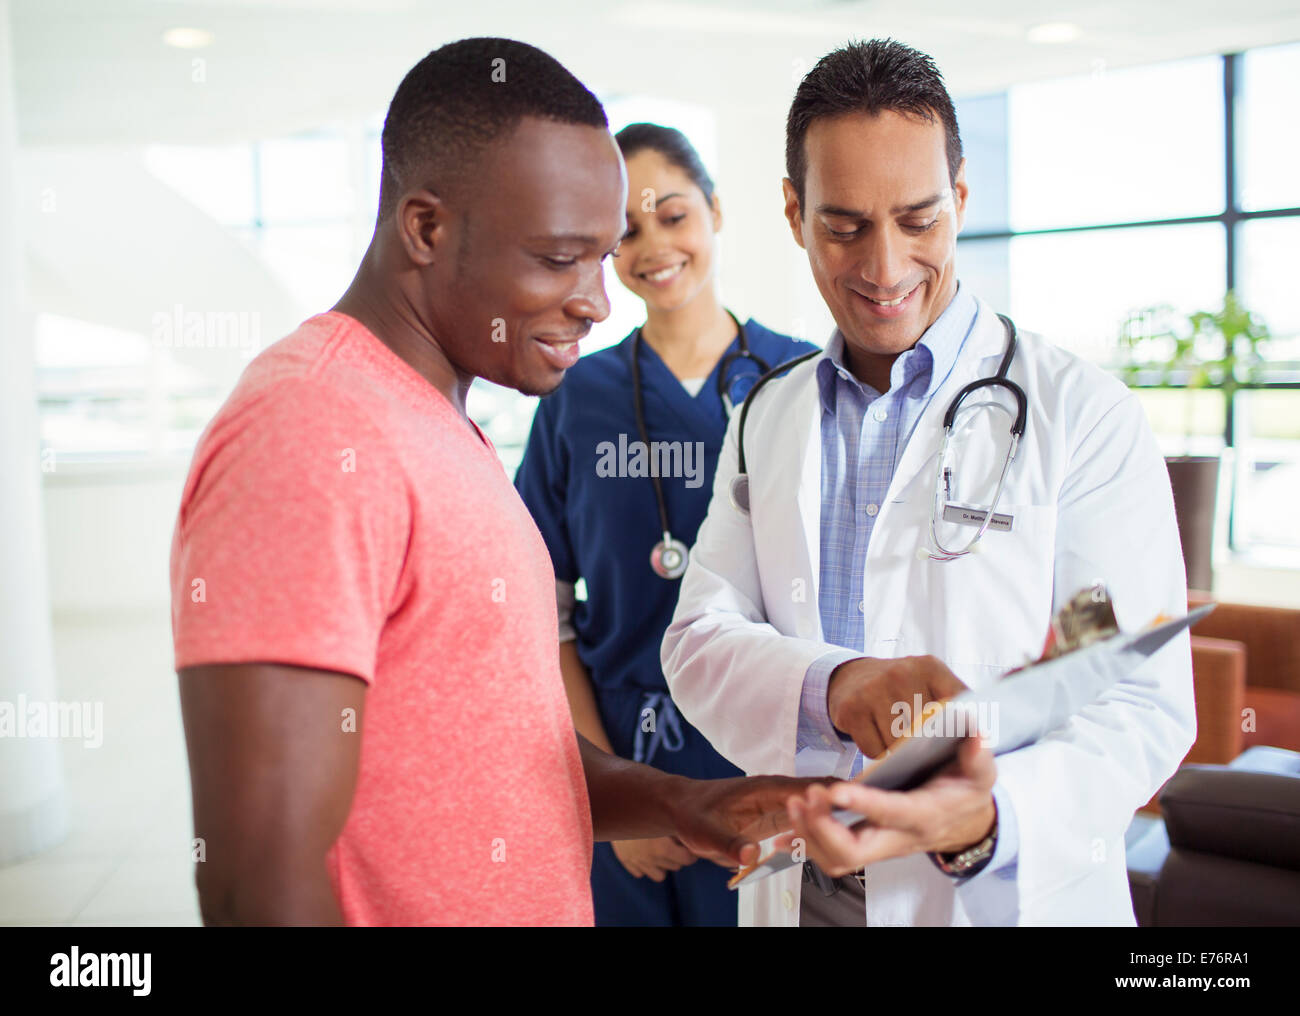 Doctor and patient reading medical chart in hospital Stock Photo